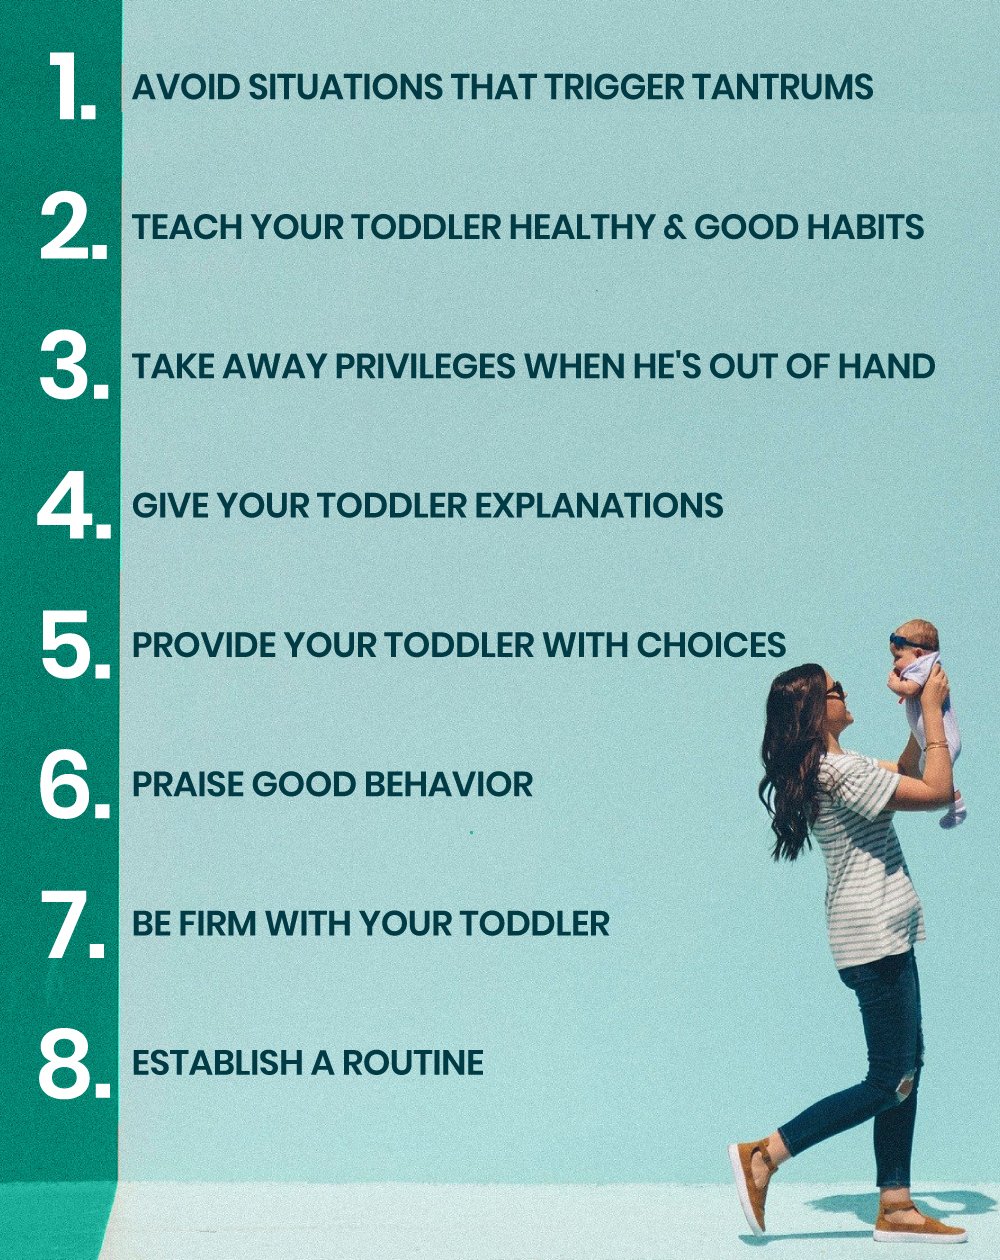 Tips for parenting 2 year olds